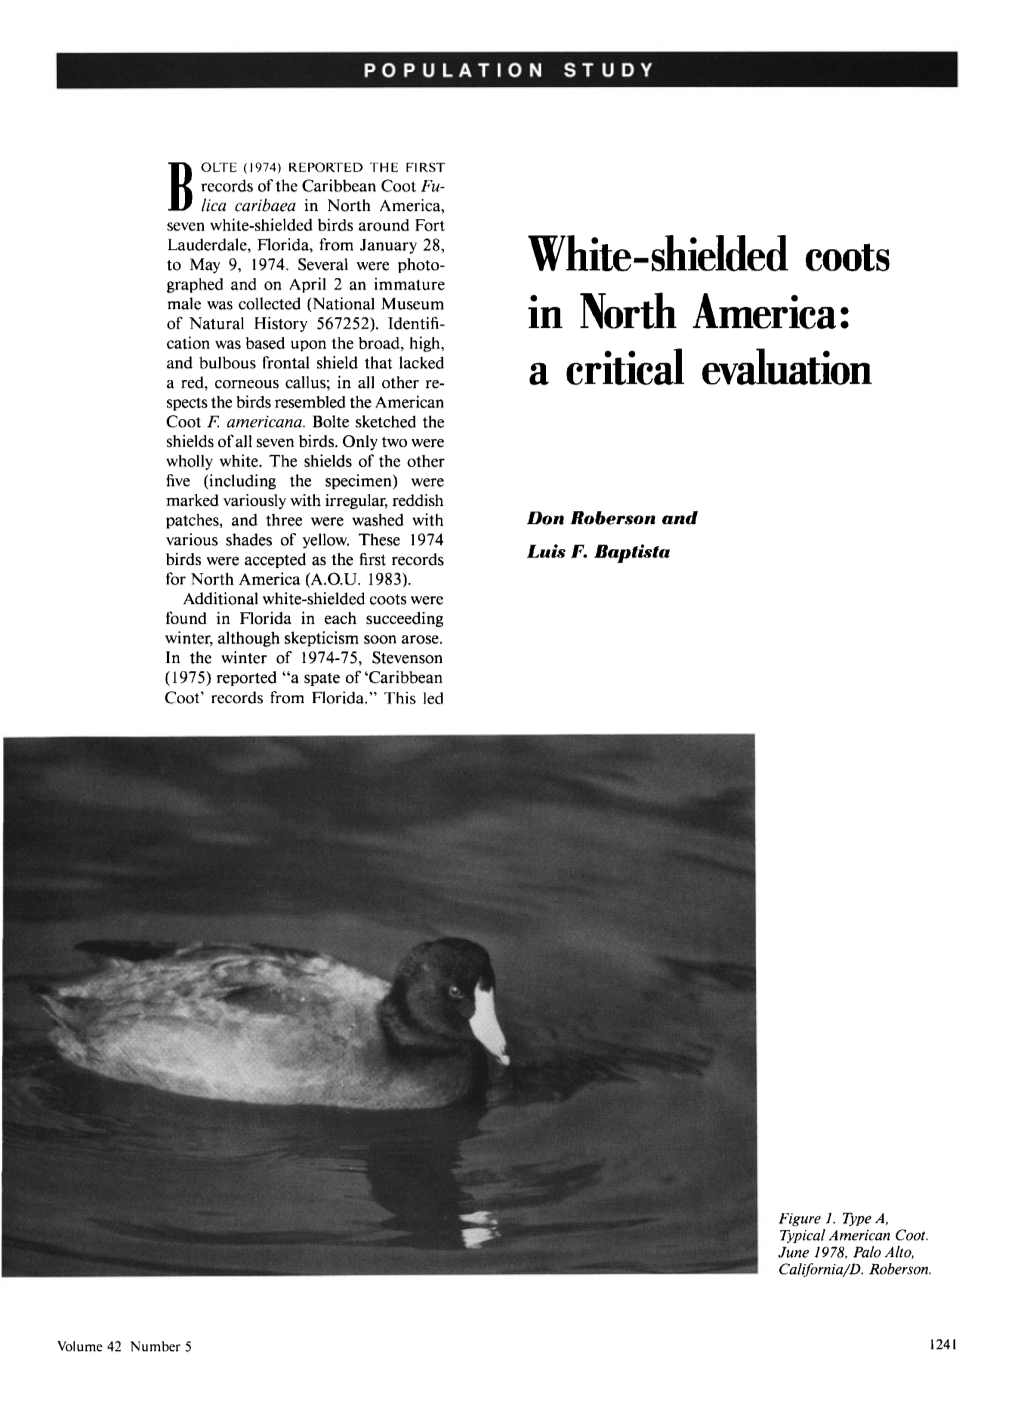 White-Shielded Coots in North America: a Critical Evaluation